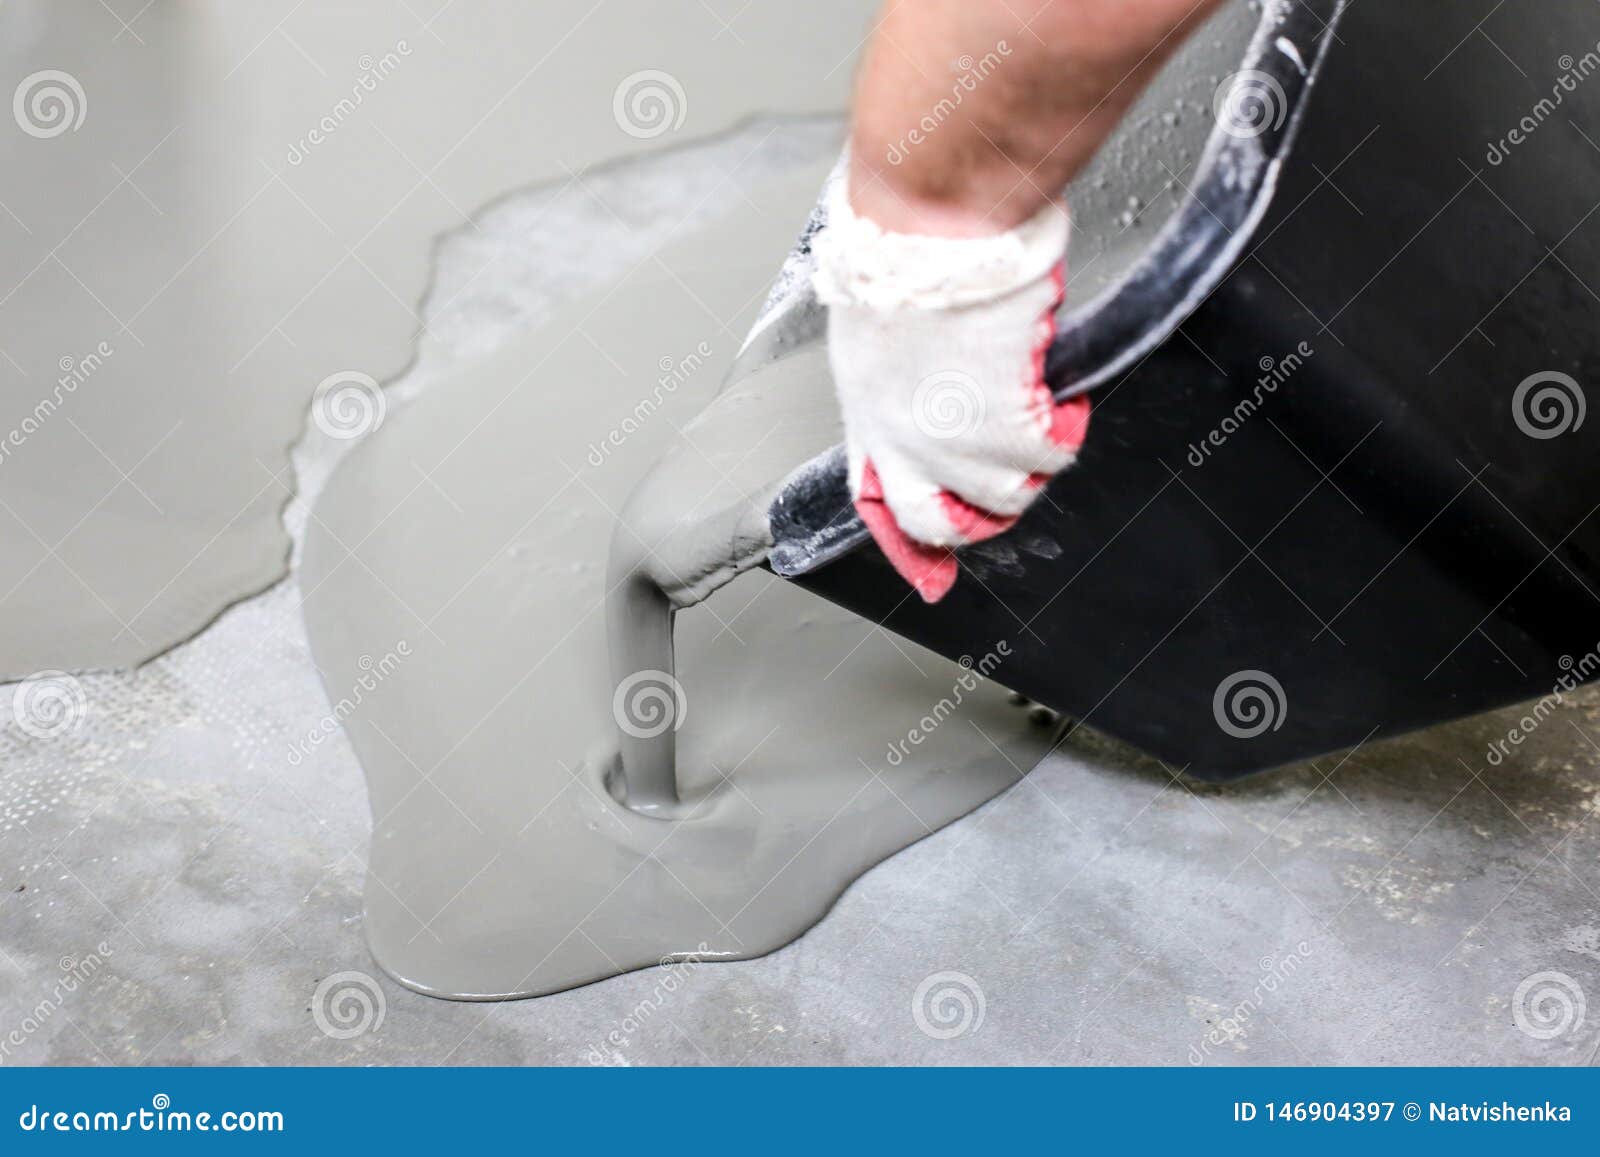 Fill Screed Floor Repair And Furnish Stock Image Image Of Cement